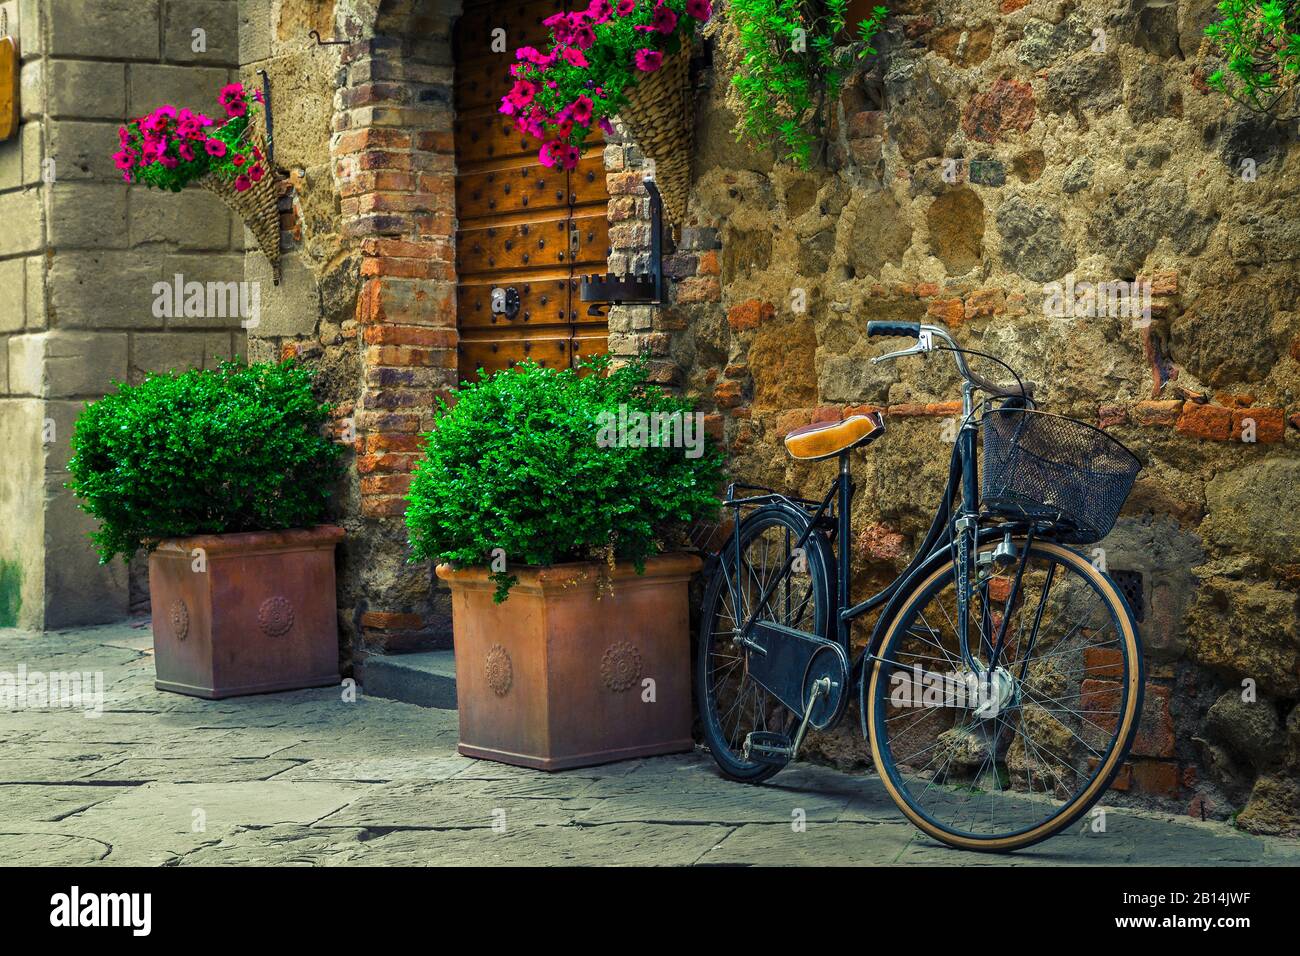 Bike Decorated Flowers In Street High Resolution Stock Photography and  Images - Alamy